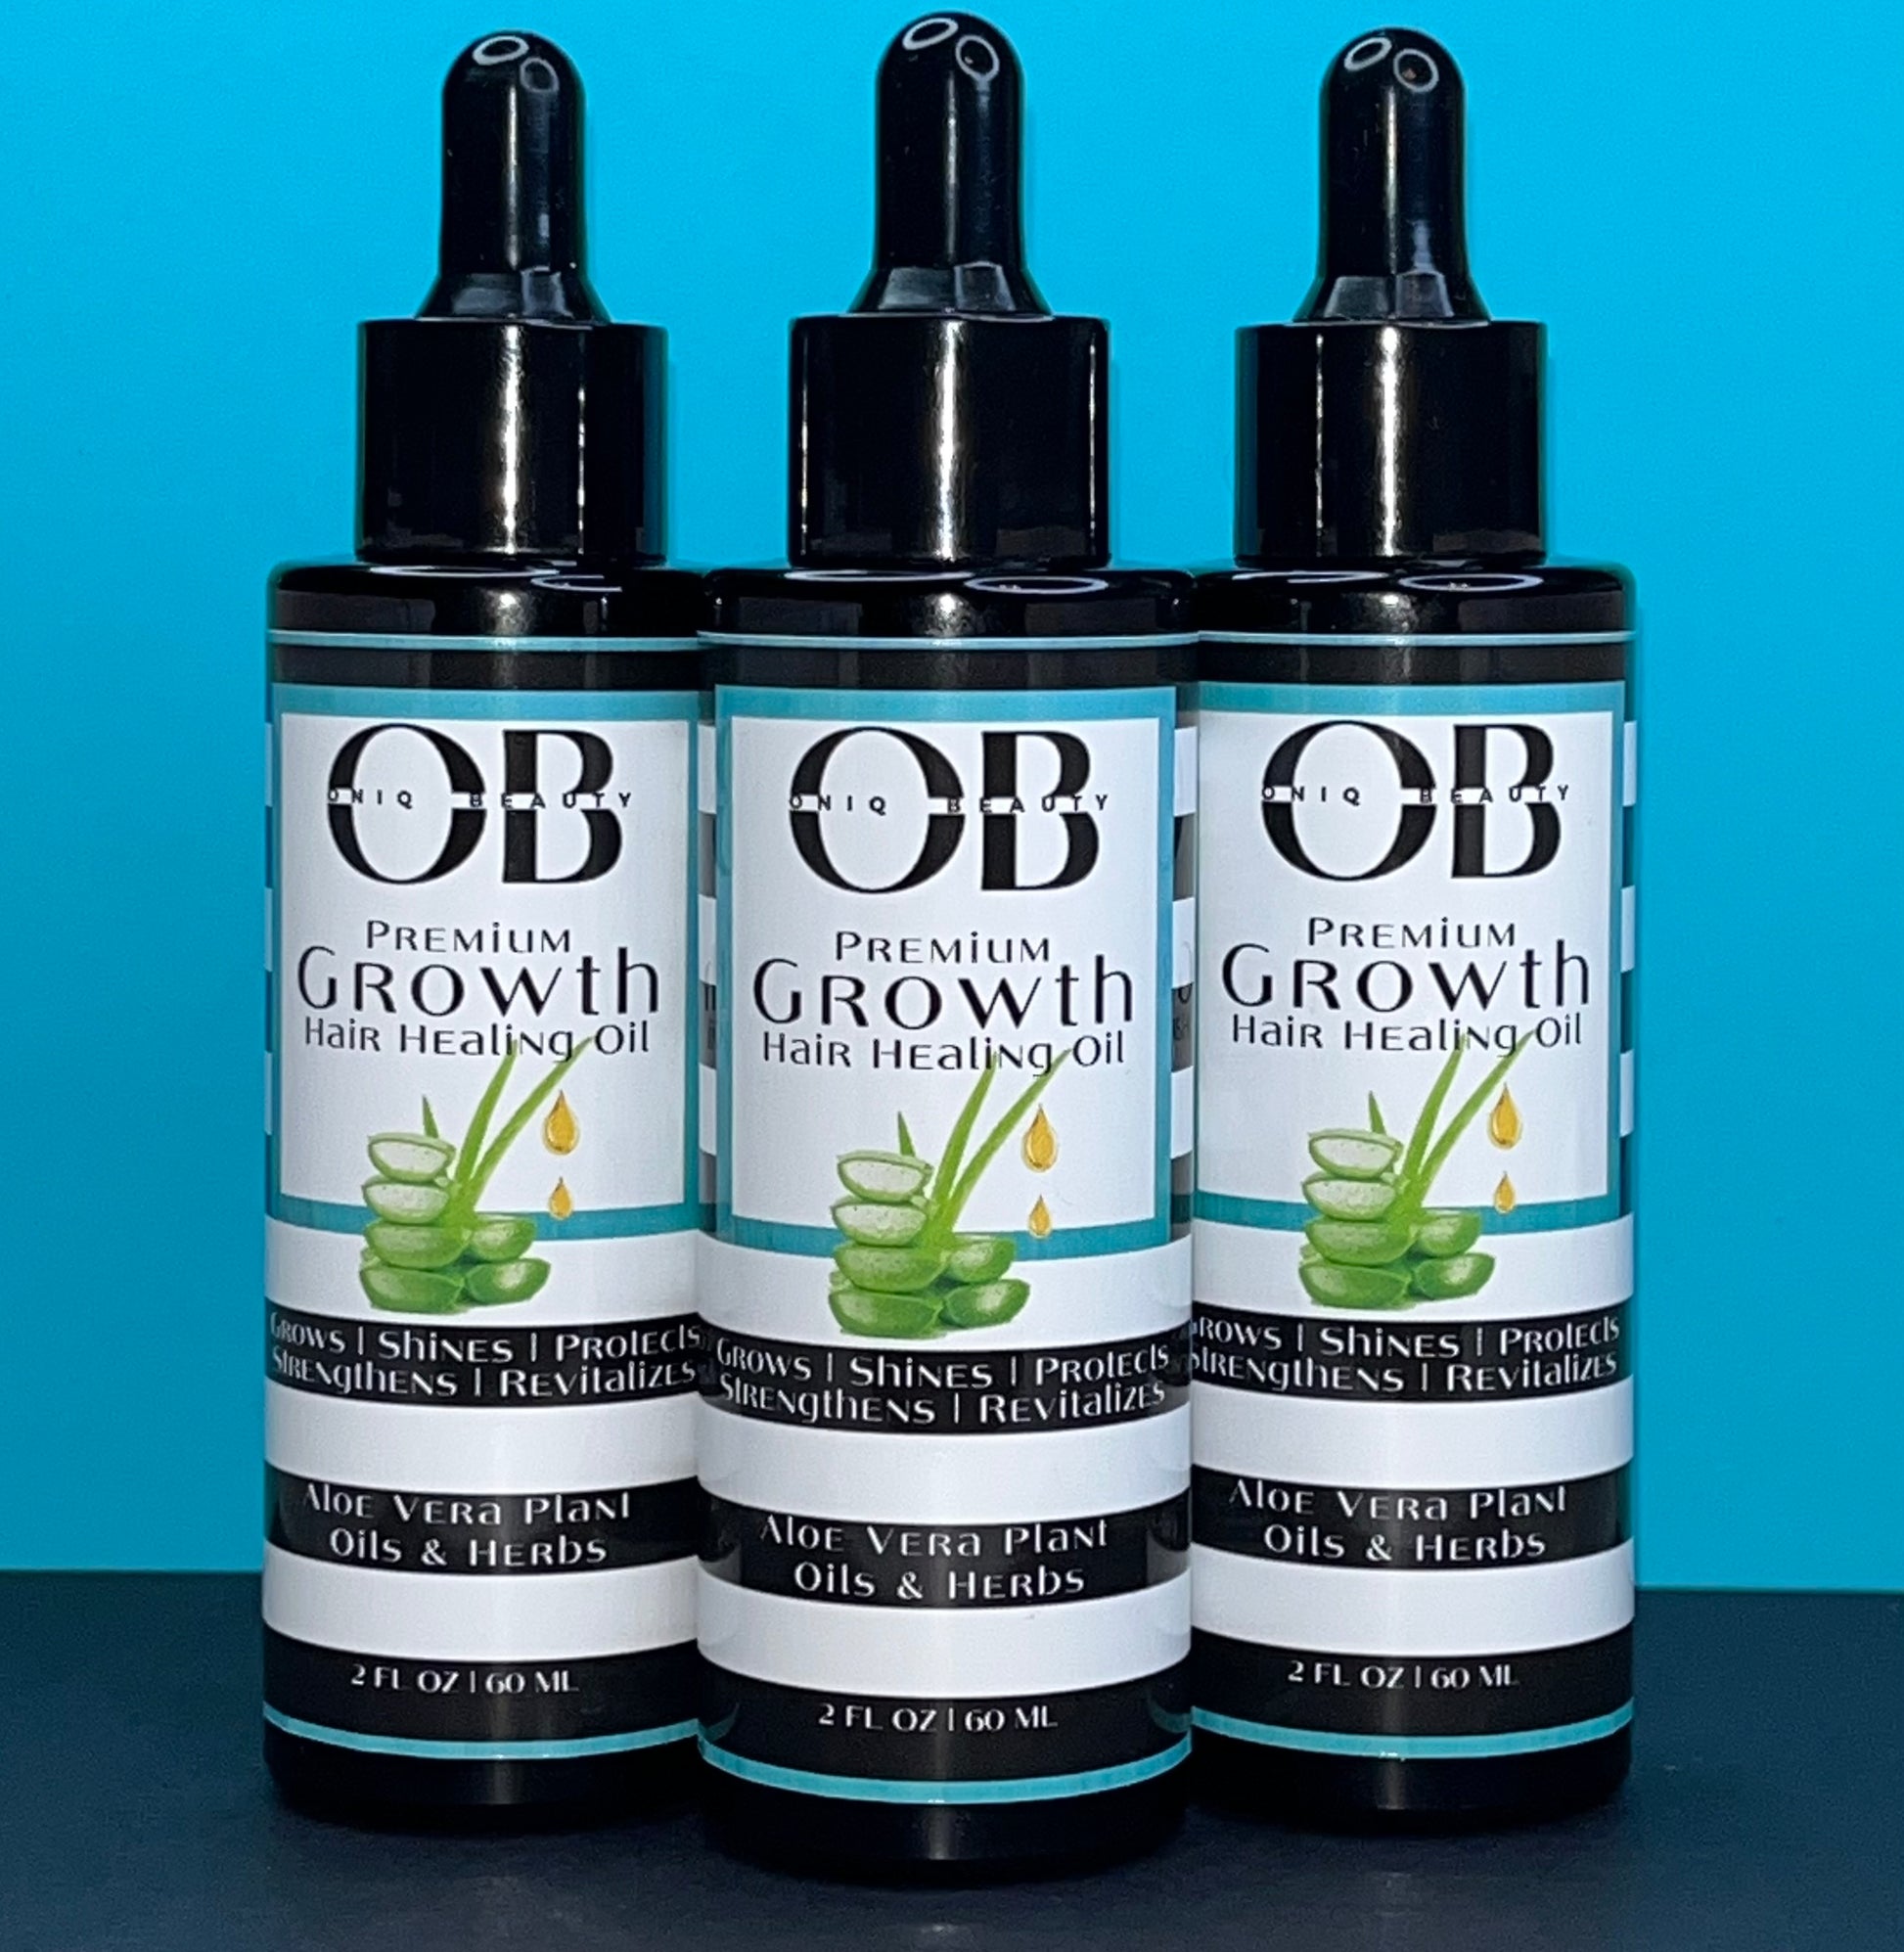 Three black 2ml, 60 fl oz glass bottles of herbal hair growth oil. ONIQ Beauty Premium Growth Hair Healing Oil with Aloe Vera, Oils and Herbs. Vegan, Alcohol-free, Chemical-Free, Not tested on animals. The oil has Aloe Vera, oils and herbs.